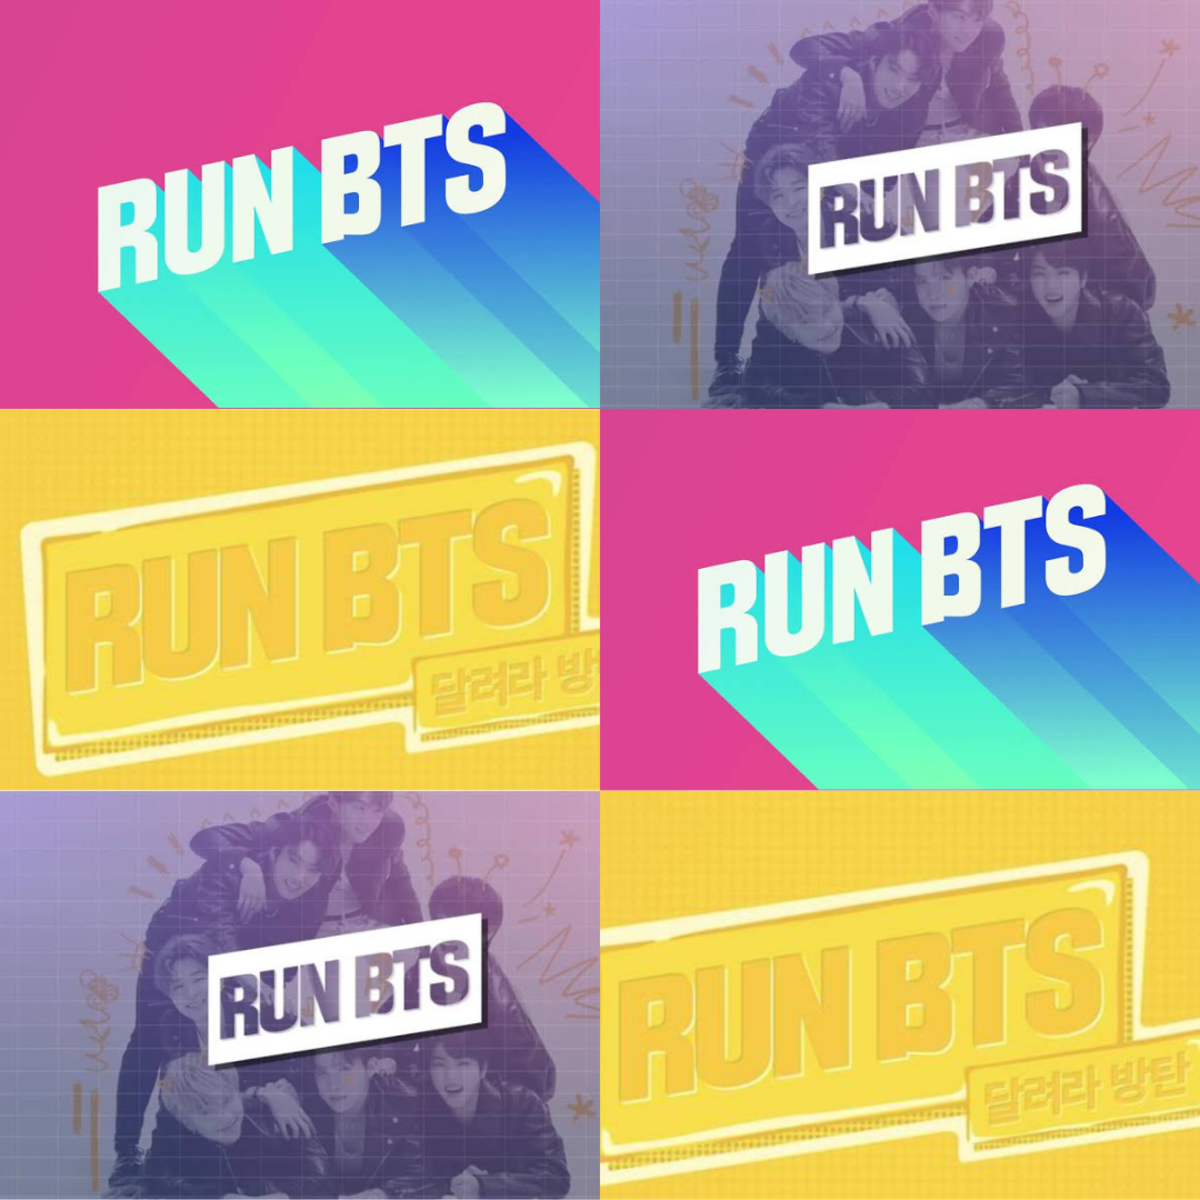 run-bts-the-complete-episode-guide